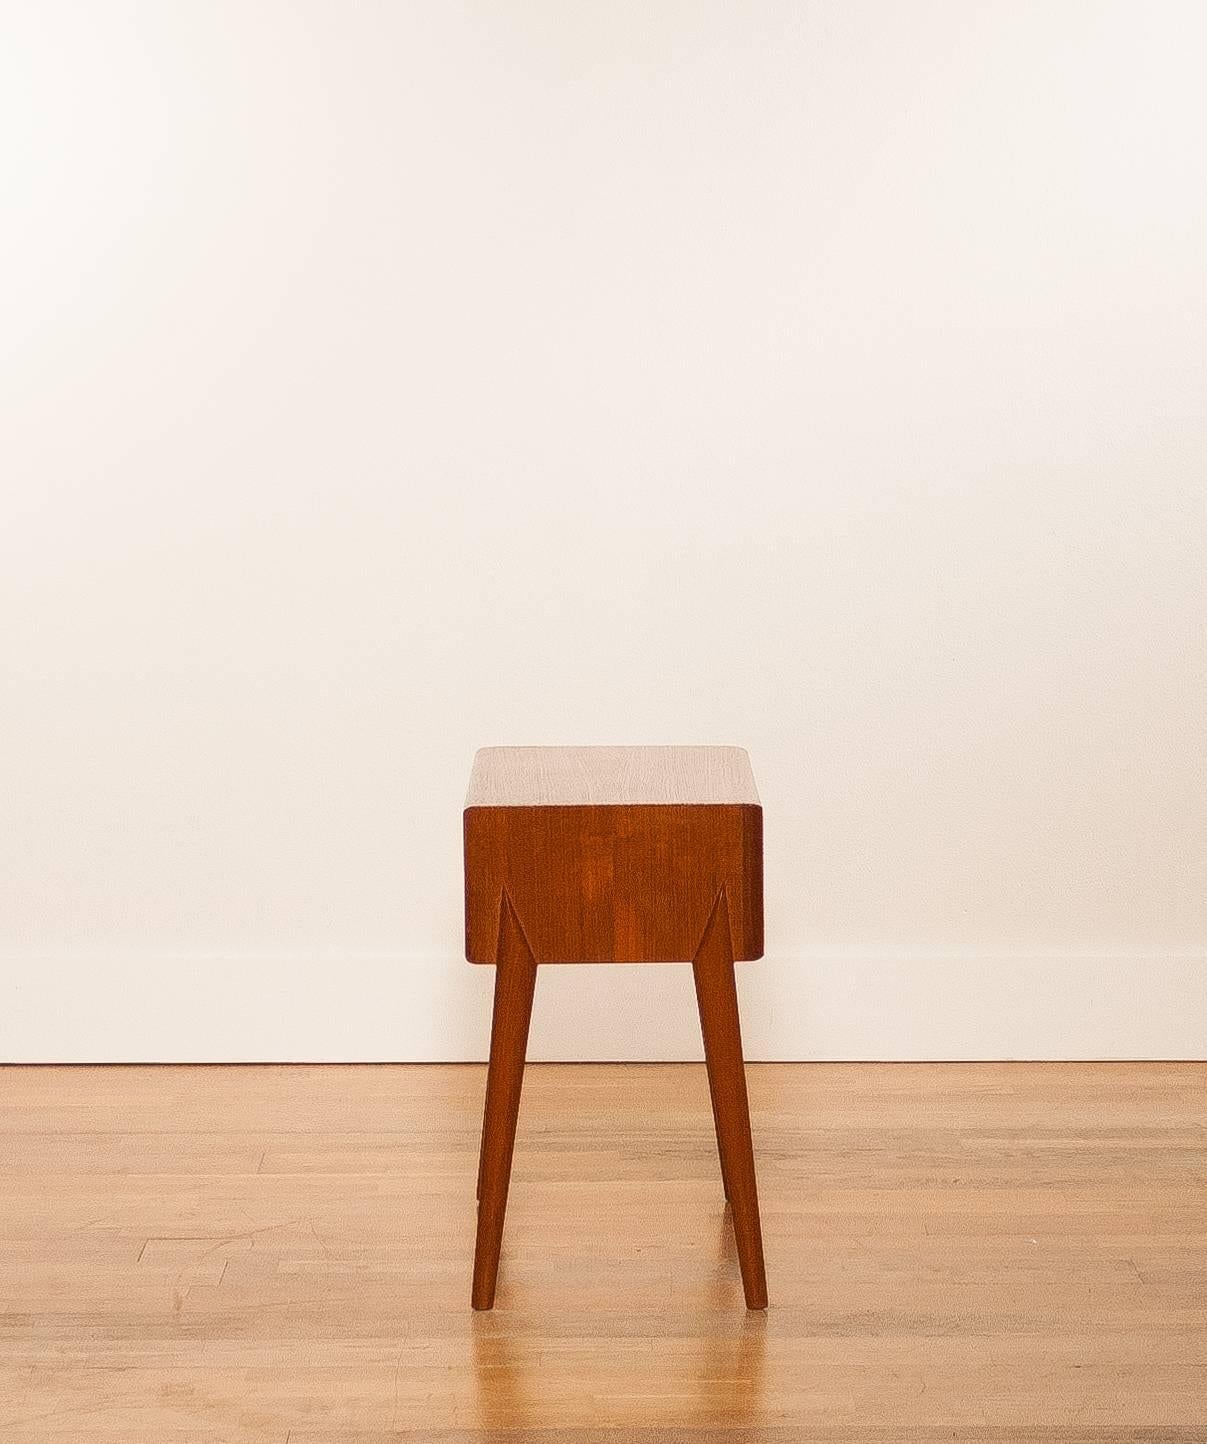 Beautiful side table made of teak in excellent condition

Designed by Arne Vodder.

Manufactured by G.T. Möbler in Sweden.

Period: 1950-1959.

The dimensions are:
60 cm. wide,
50 cm. height,
30 cm. depth.